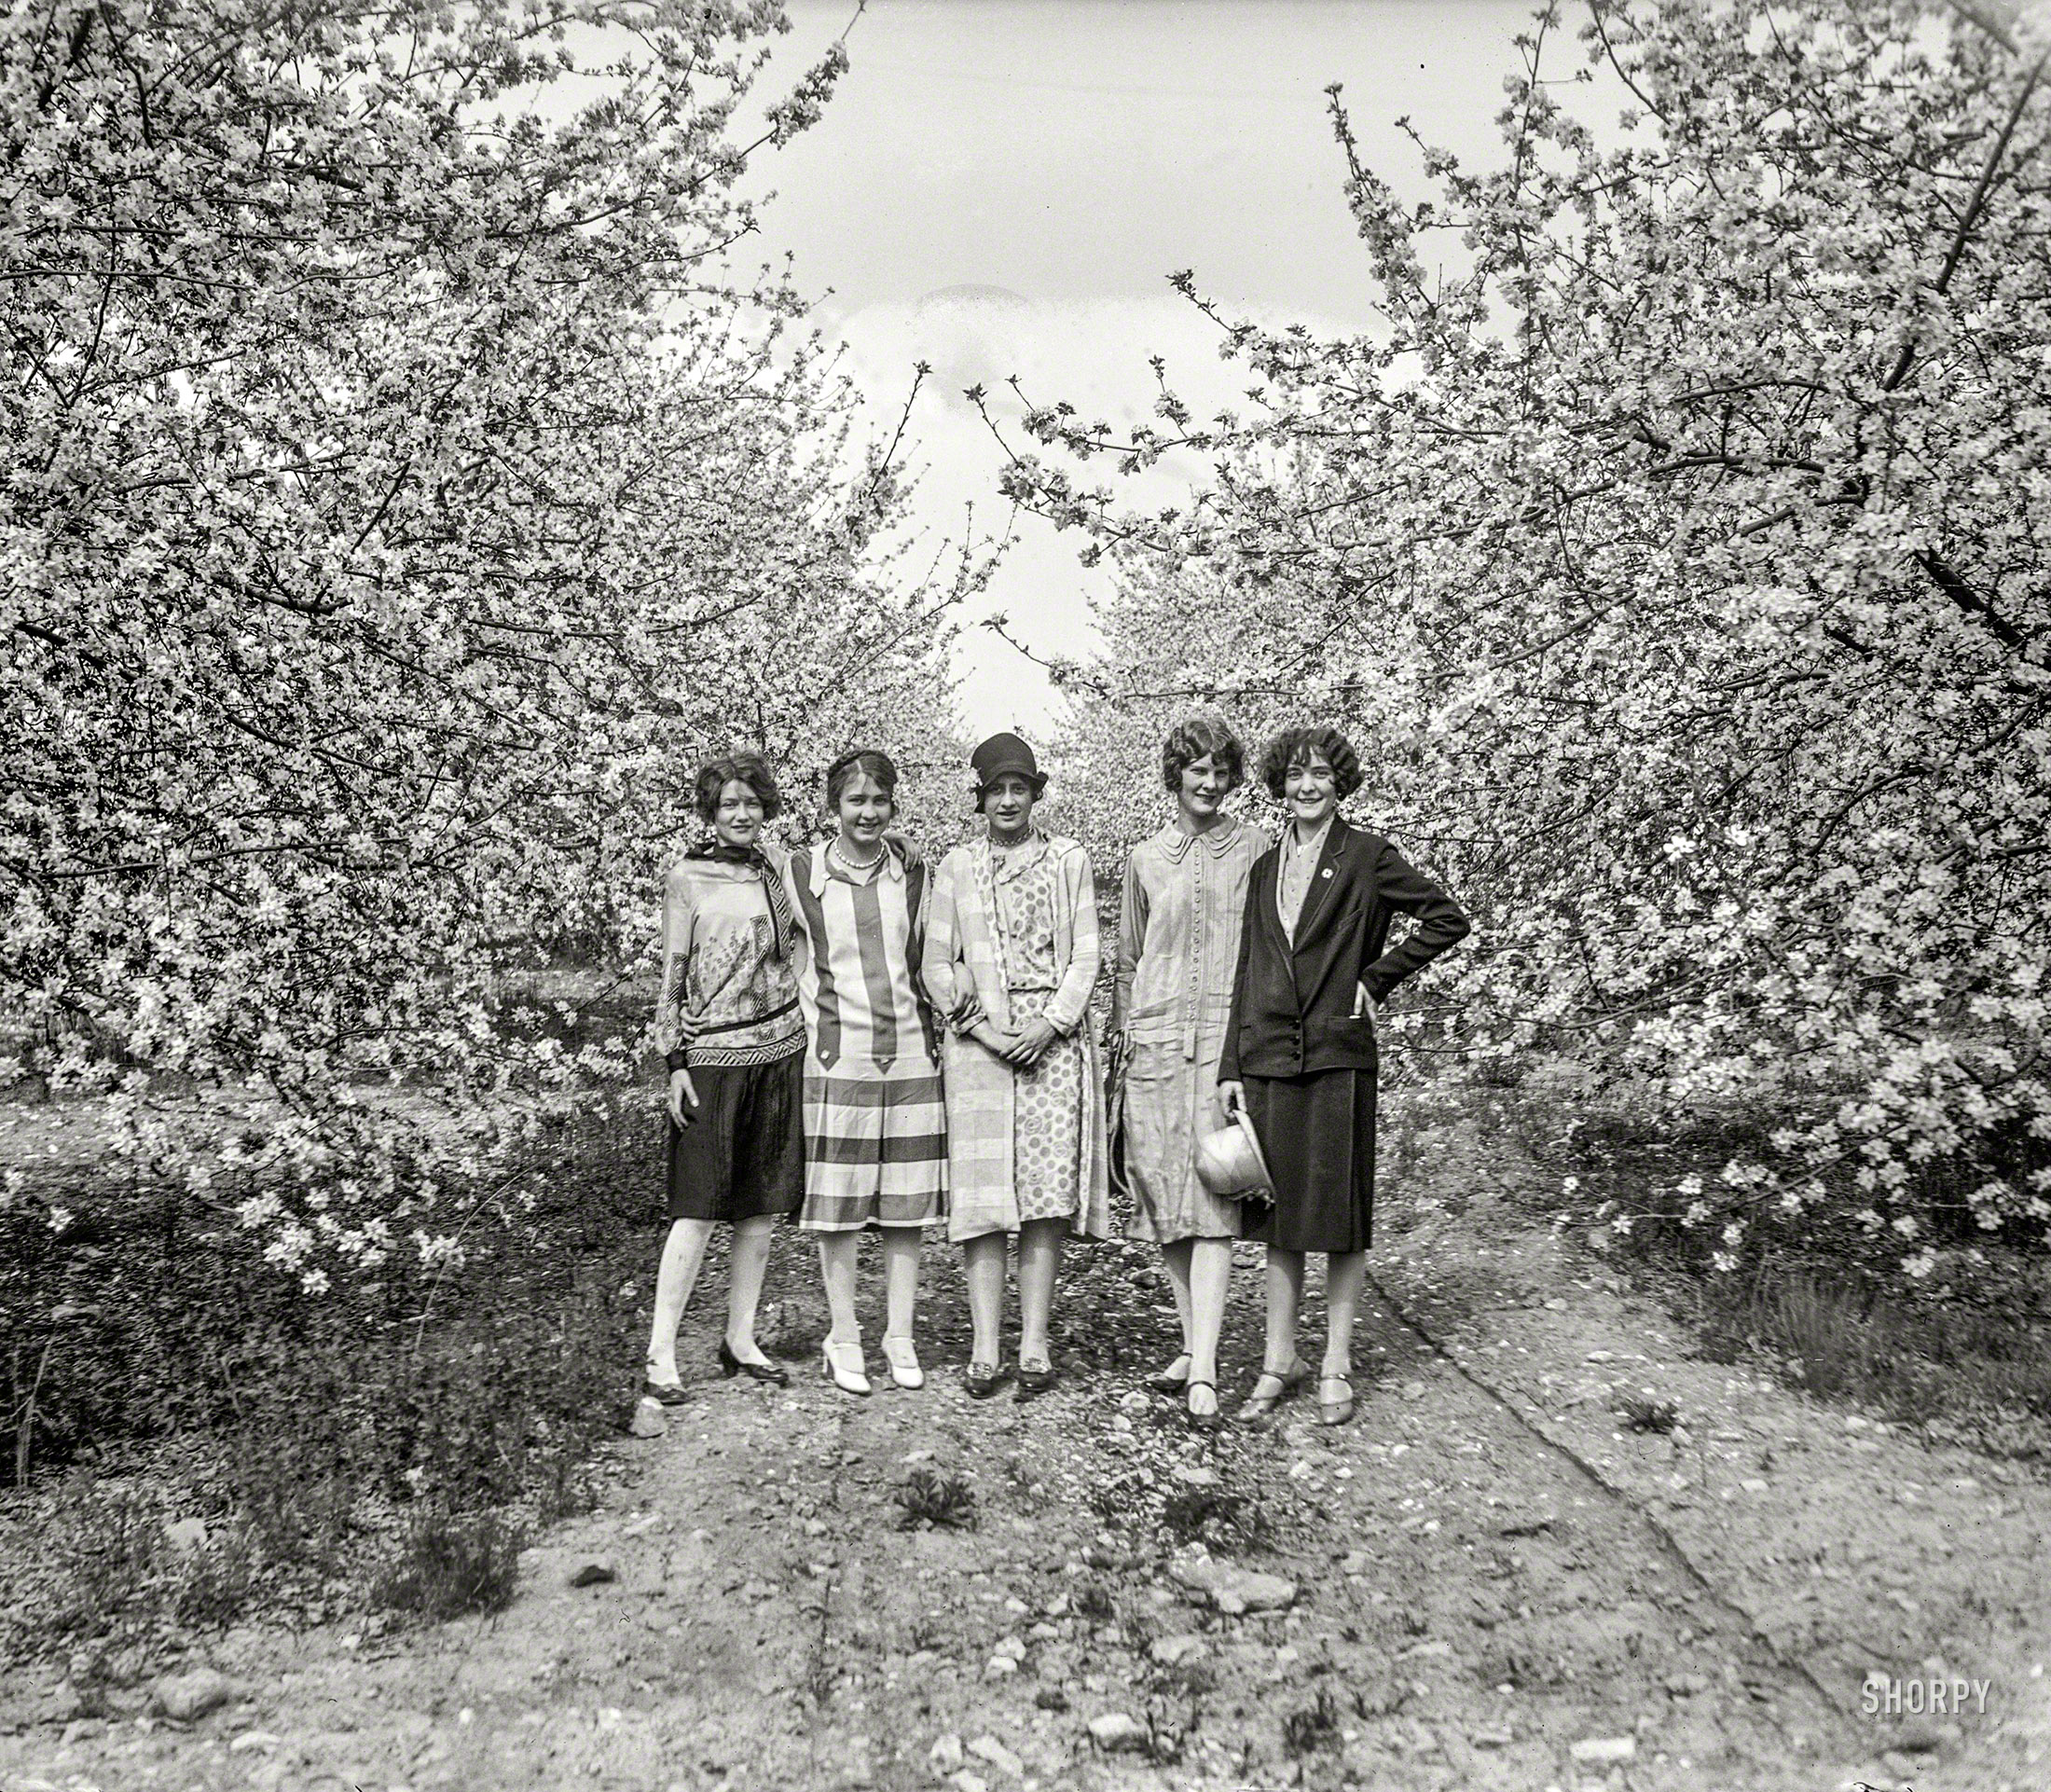 May 3, 1926. "Apple blossoms at Winchester, Virginia." Nature's palette bursting forth in a riotous rainbow of grays. 5x7 inch glass negative. View full size.